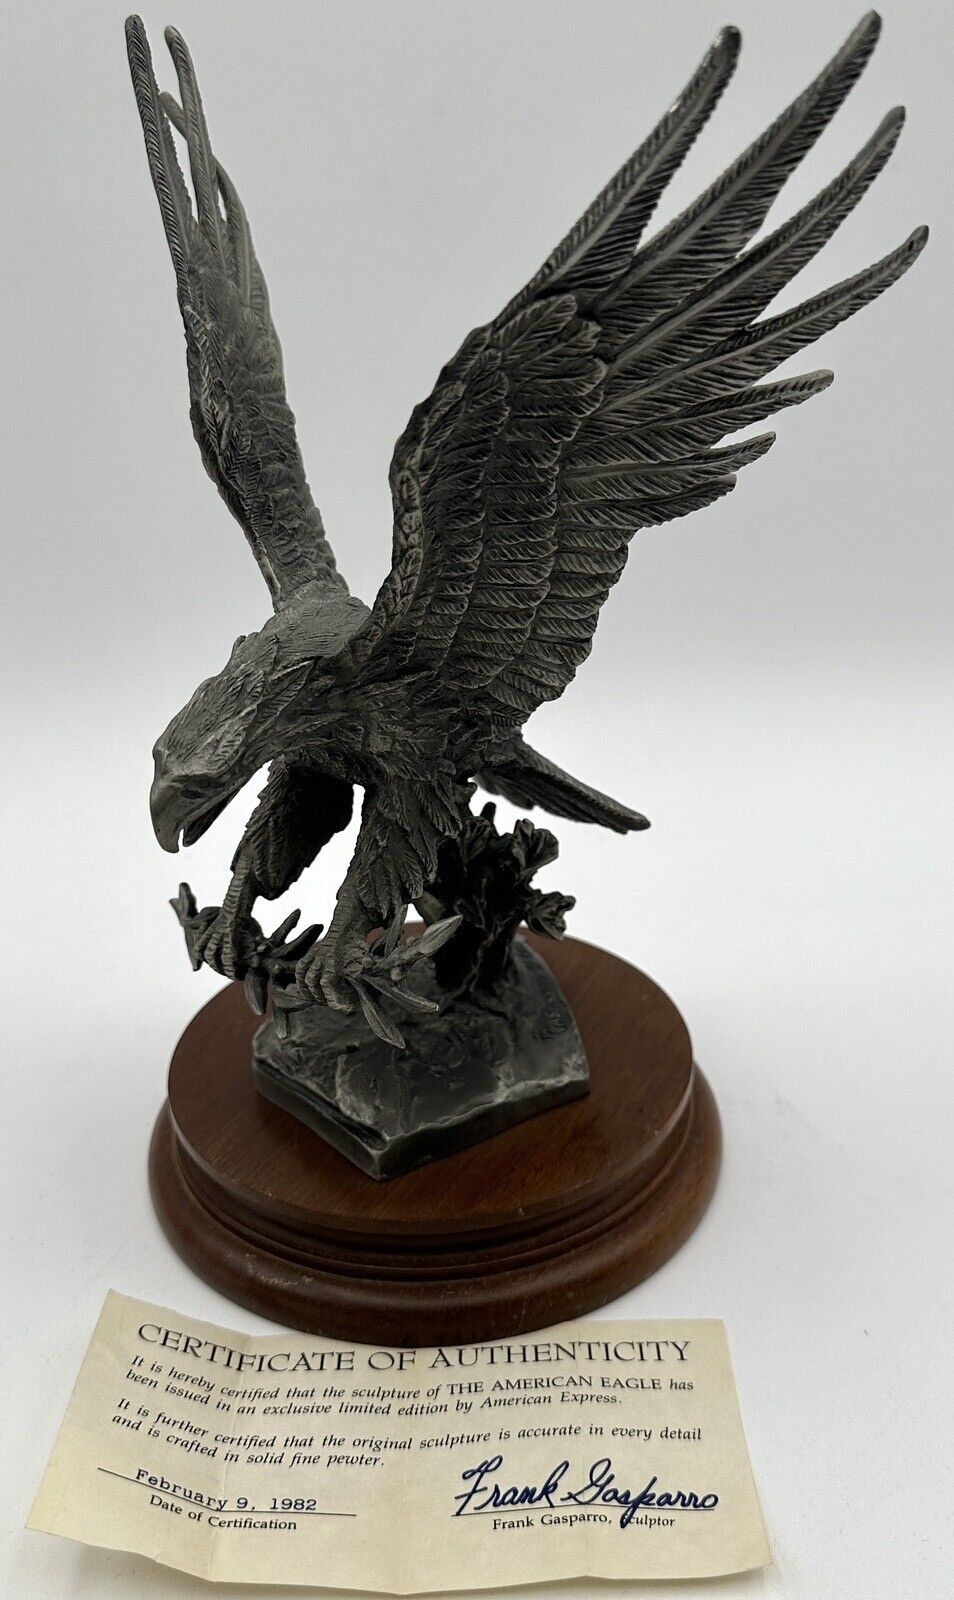 American Eagle Sculpture Frank Gasparro 1982 Limited Edition Chilmark Pewter